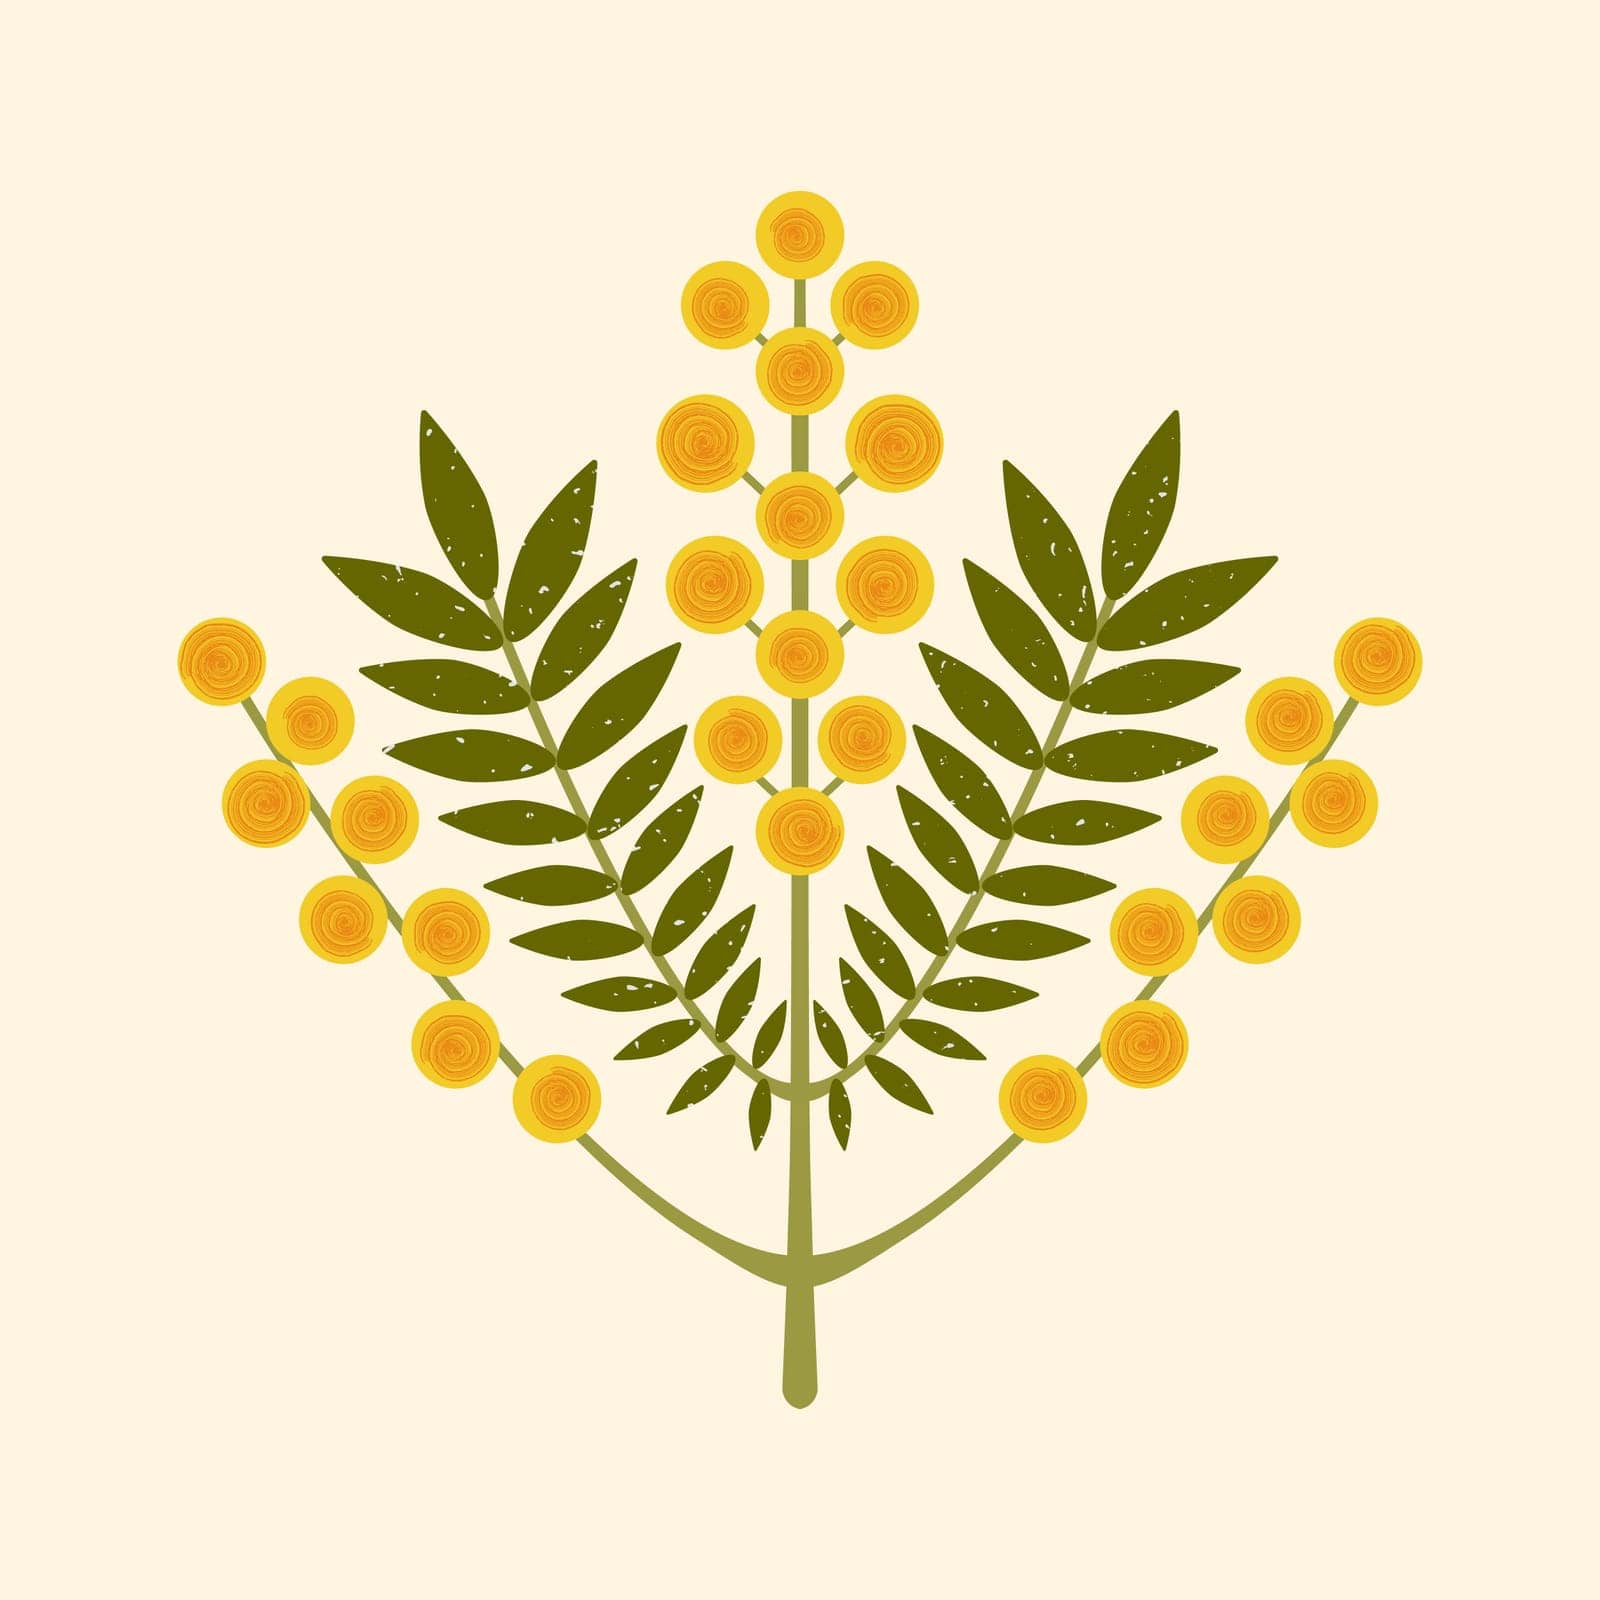 Geometric flower vector illustration. Modern symmetrical Mimosa branch with yellow flowers and leaves on pastel background. Australian Silver Wattle plant drawn in folk flat style with brush texture